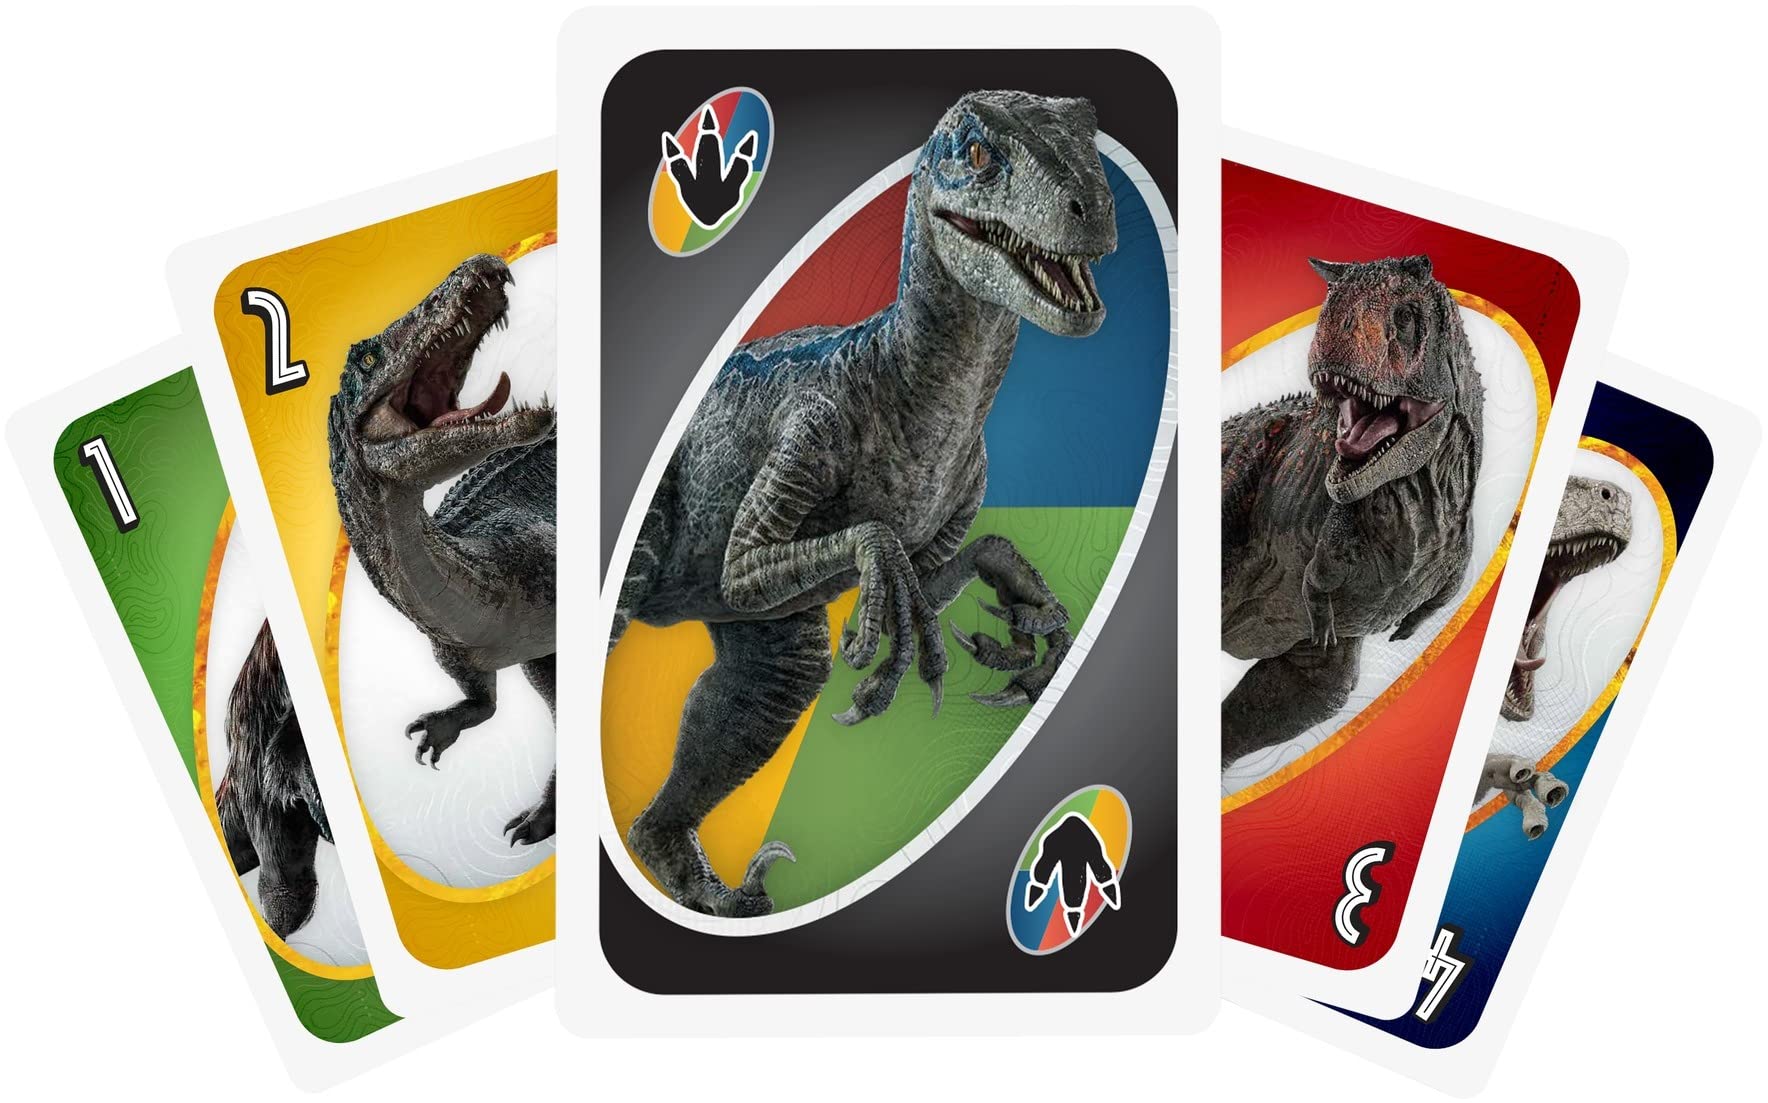 Jurassic World Toys UNO Dominion Card Game, Travel Game in Collectible Storage Tin & Special Rule for 2-10 Players (Amazon Exclusive)